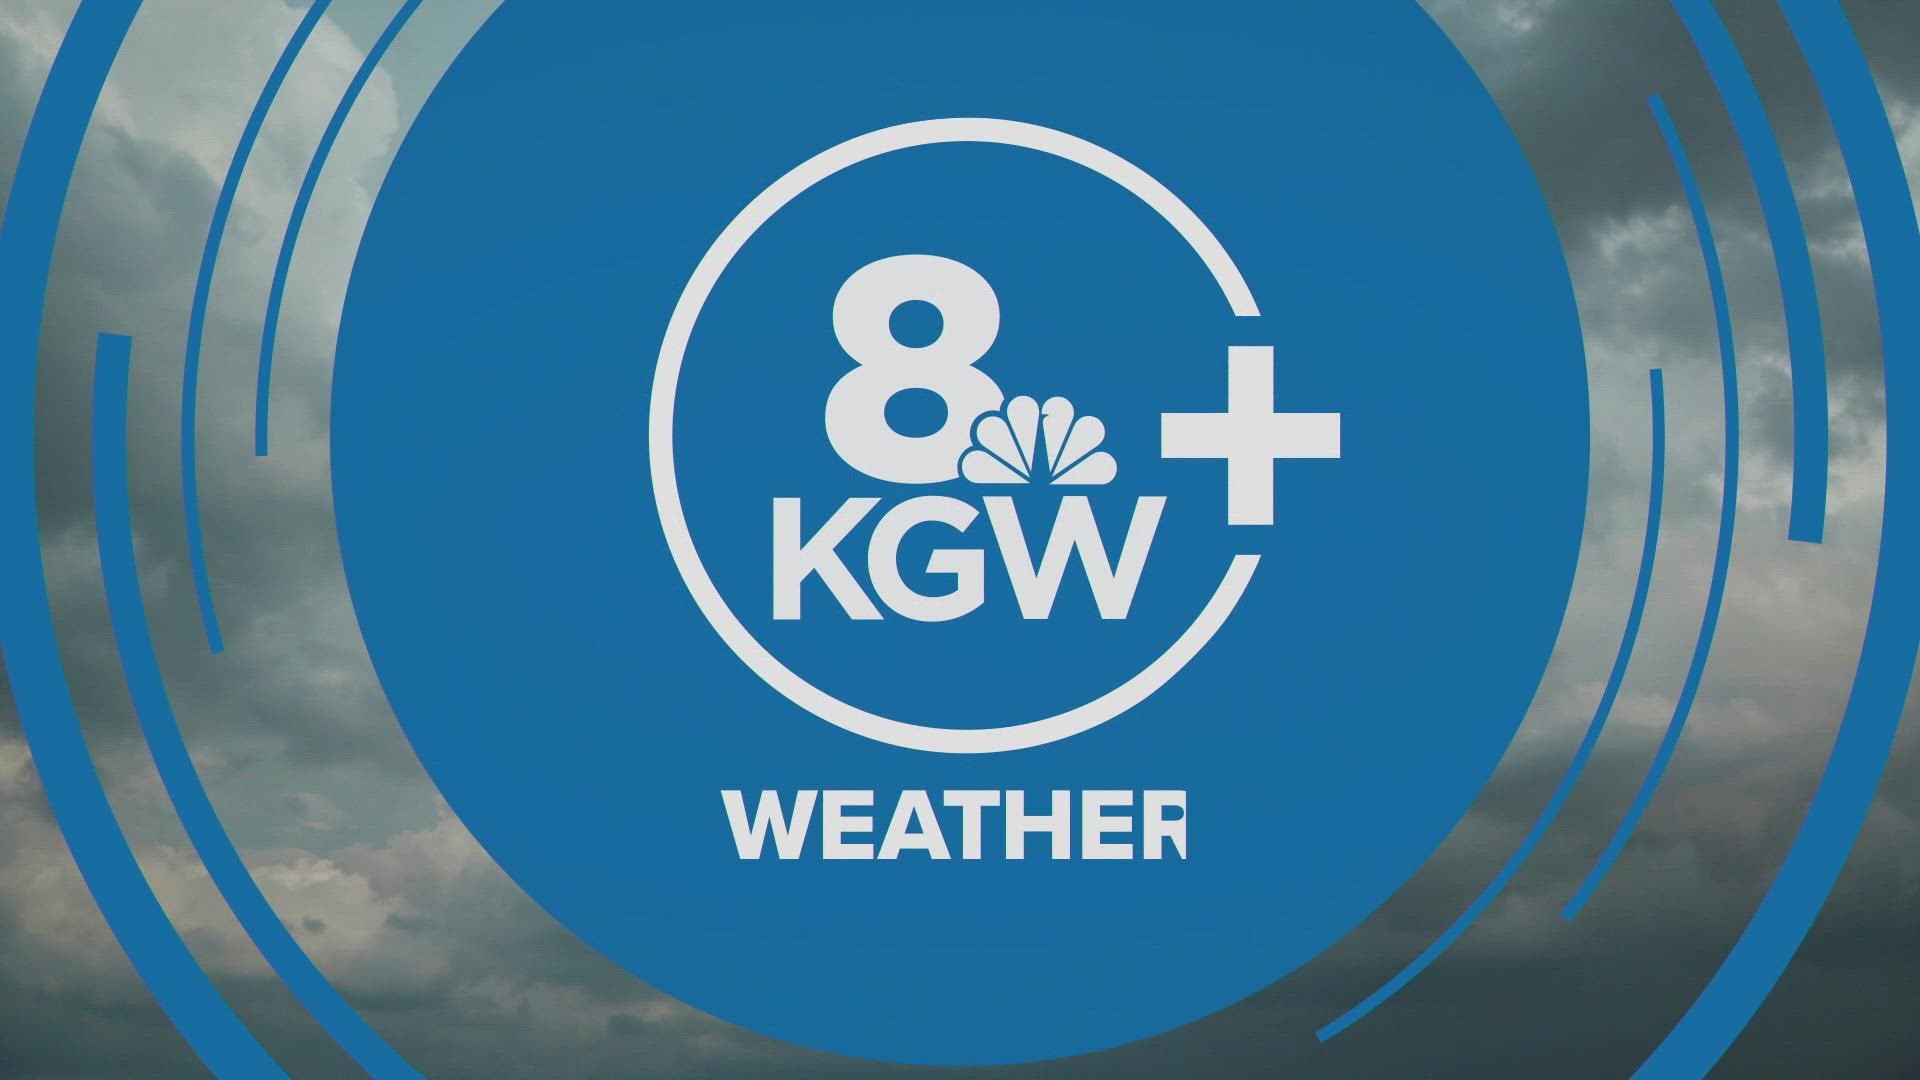 KGW meteorologist Rod Hill has the KGW+ Weather report for Portland, Oregon and surrounding areas for Wednesday, Dec. 7, 2022.